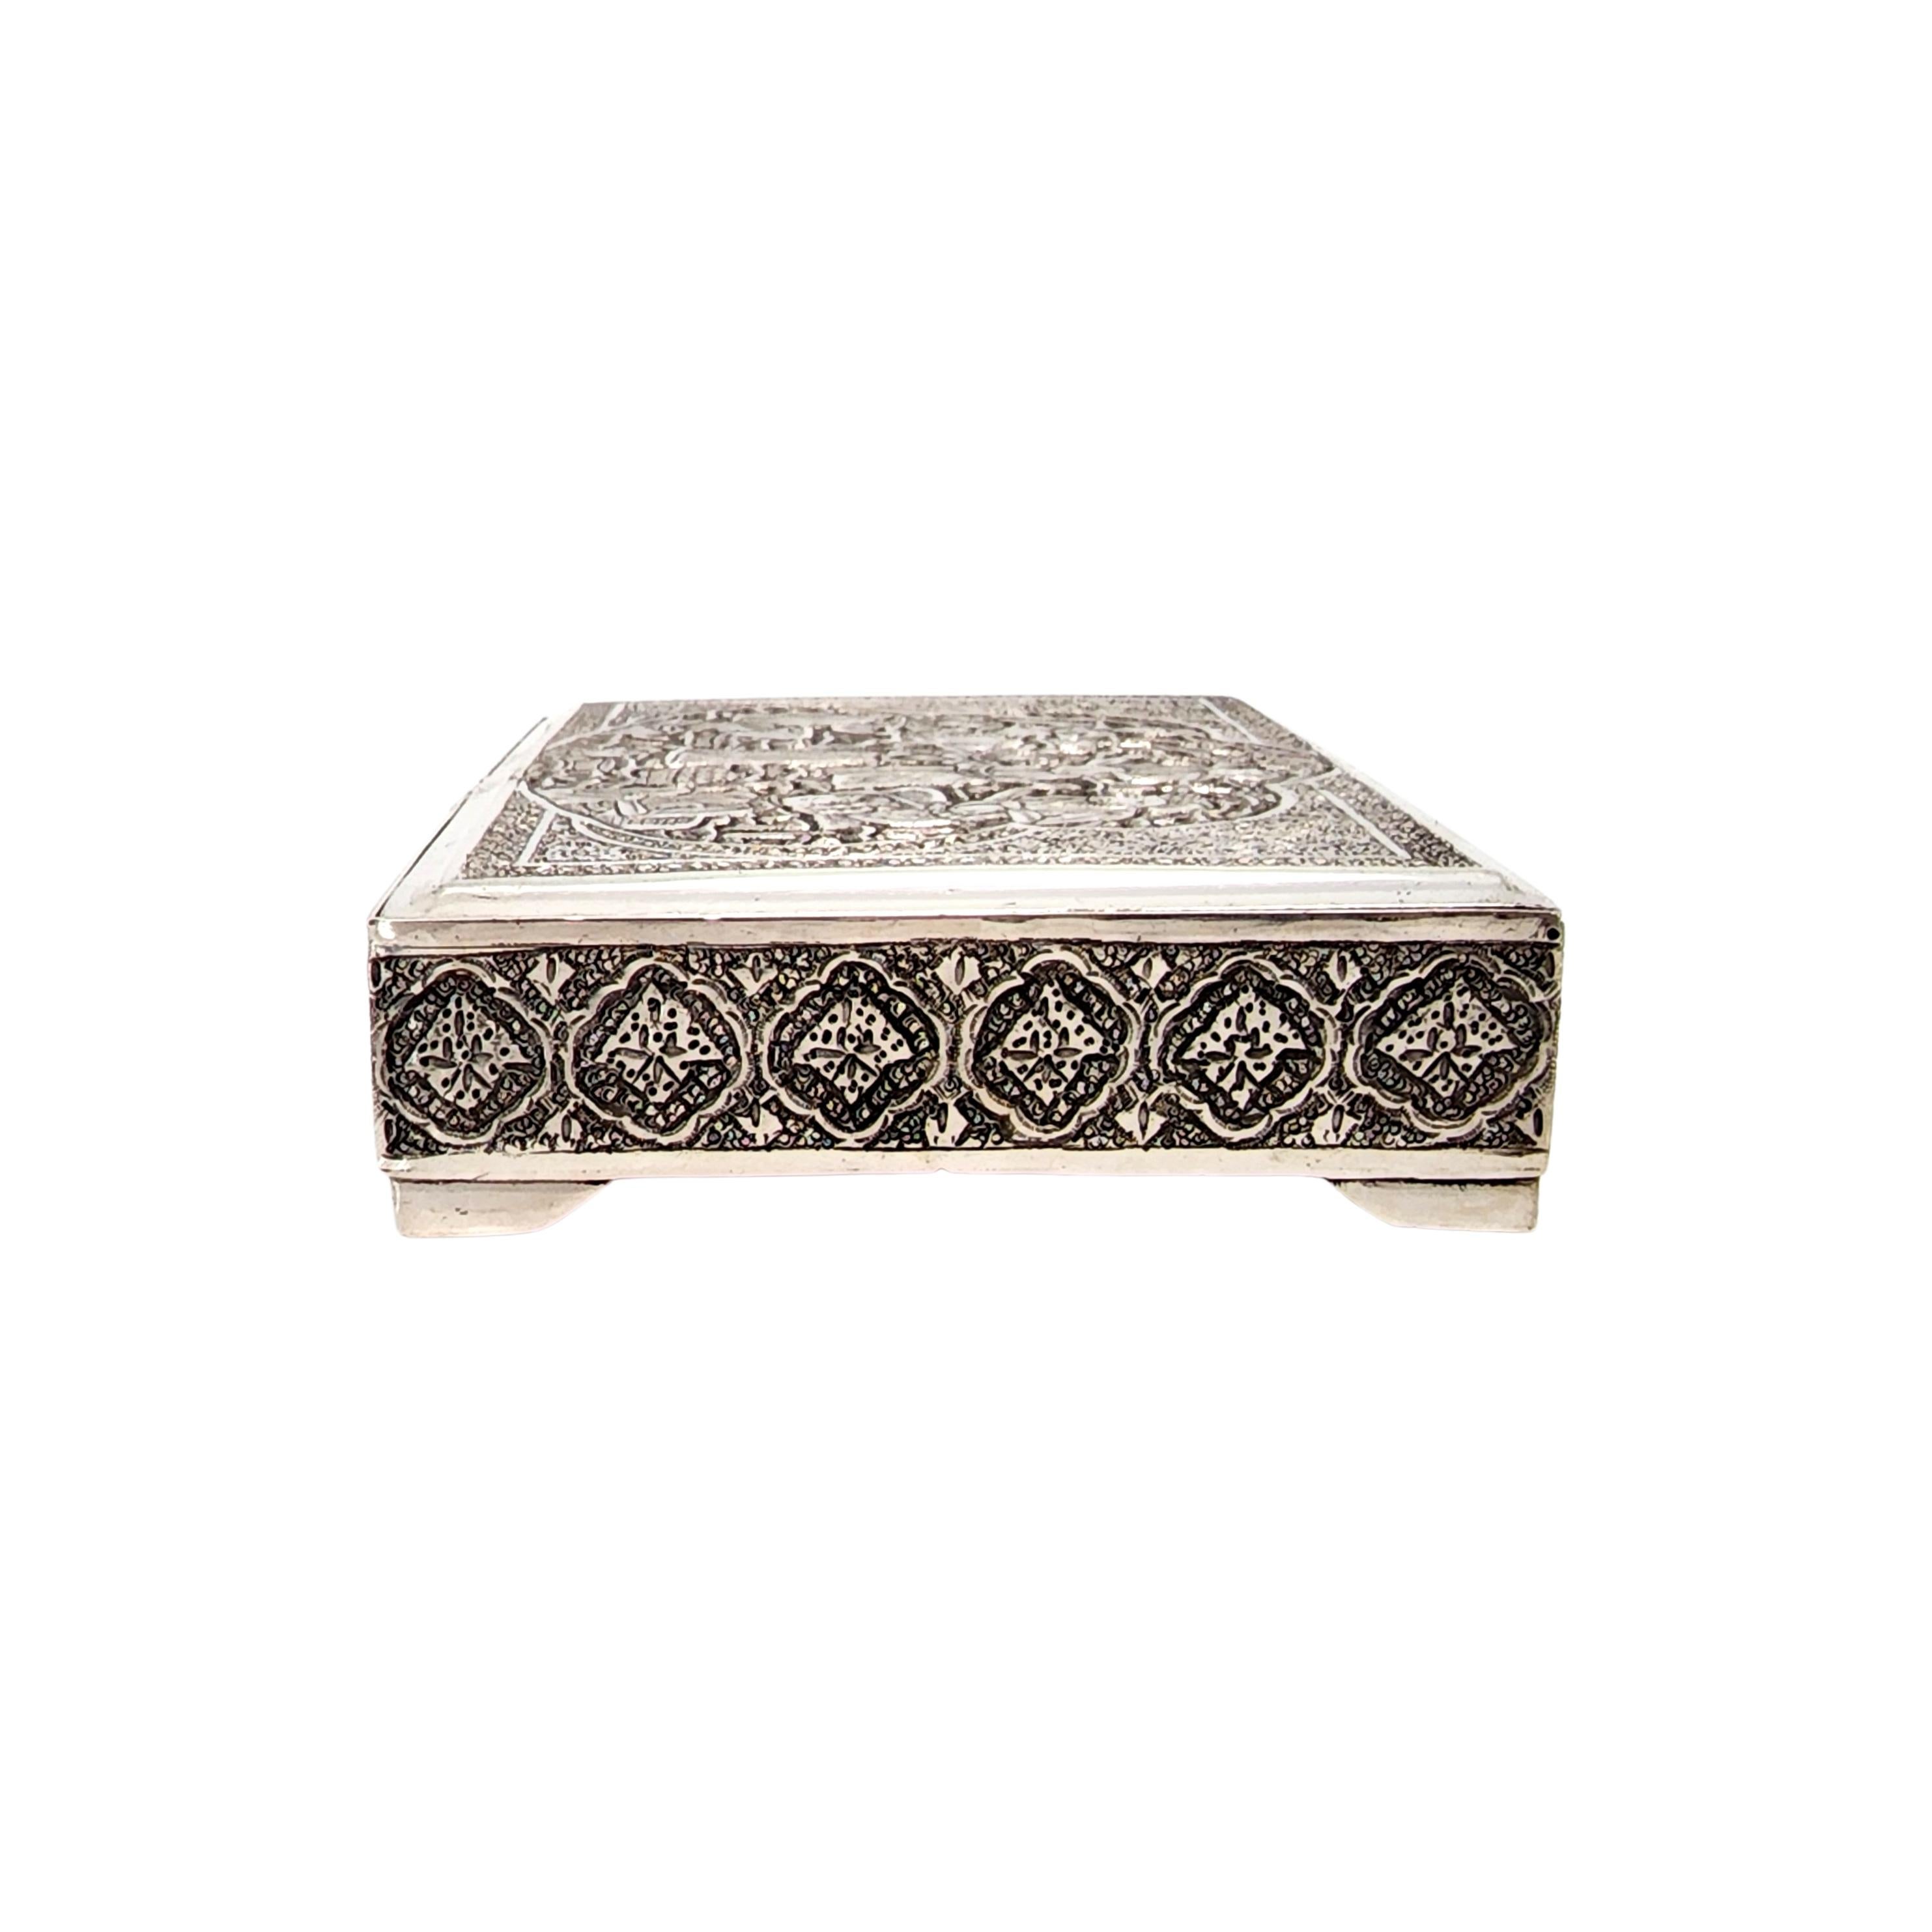 Middle Eastern Persian silver box.

Ornate designs all around the sides and top of this box. The lid features a scene of Middle Eastern people. Hinged lid.

Measures approx 5 5/8